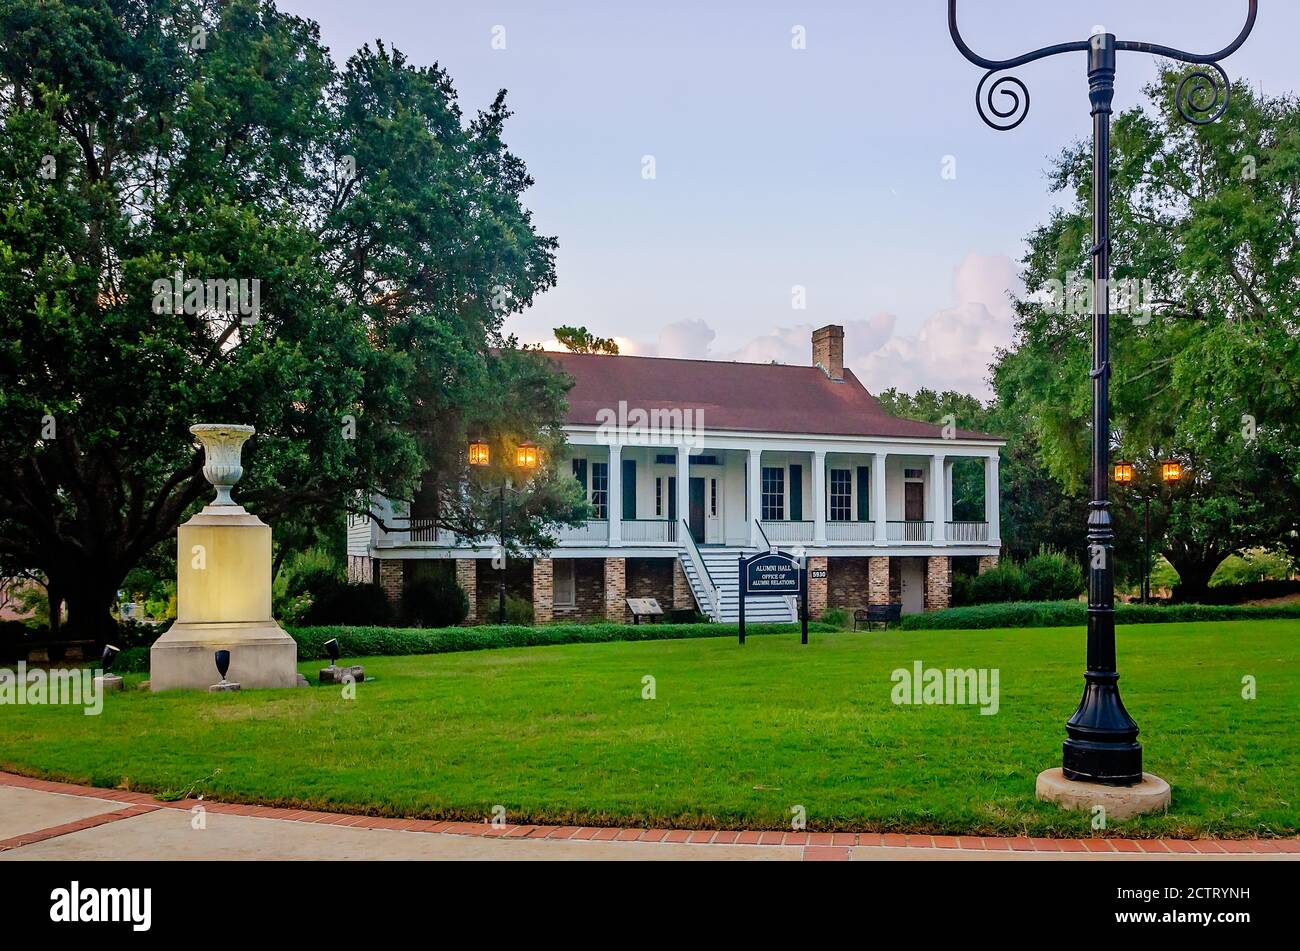 Alumni Hall, which houses the Office of Alumni Relations, is pictured at the University of South Alabama, Aug. 22, 2020, in Mobile, Alabama. Stock Photo